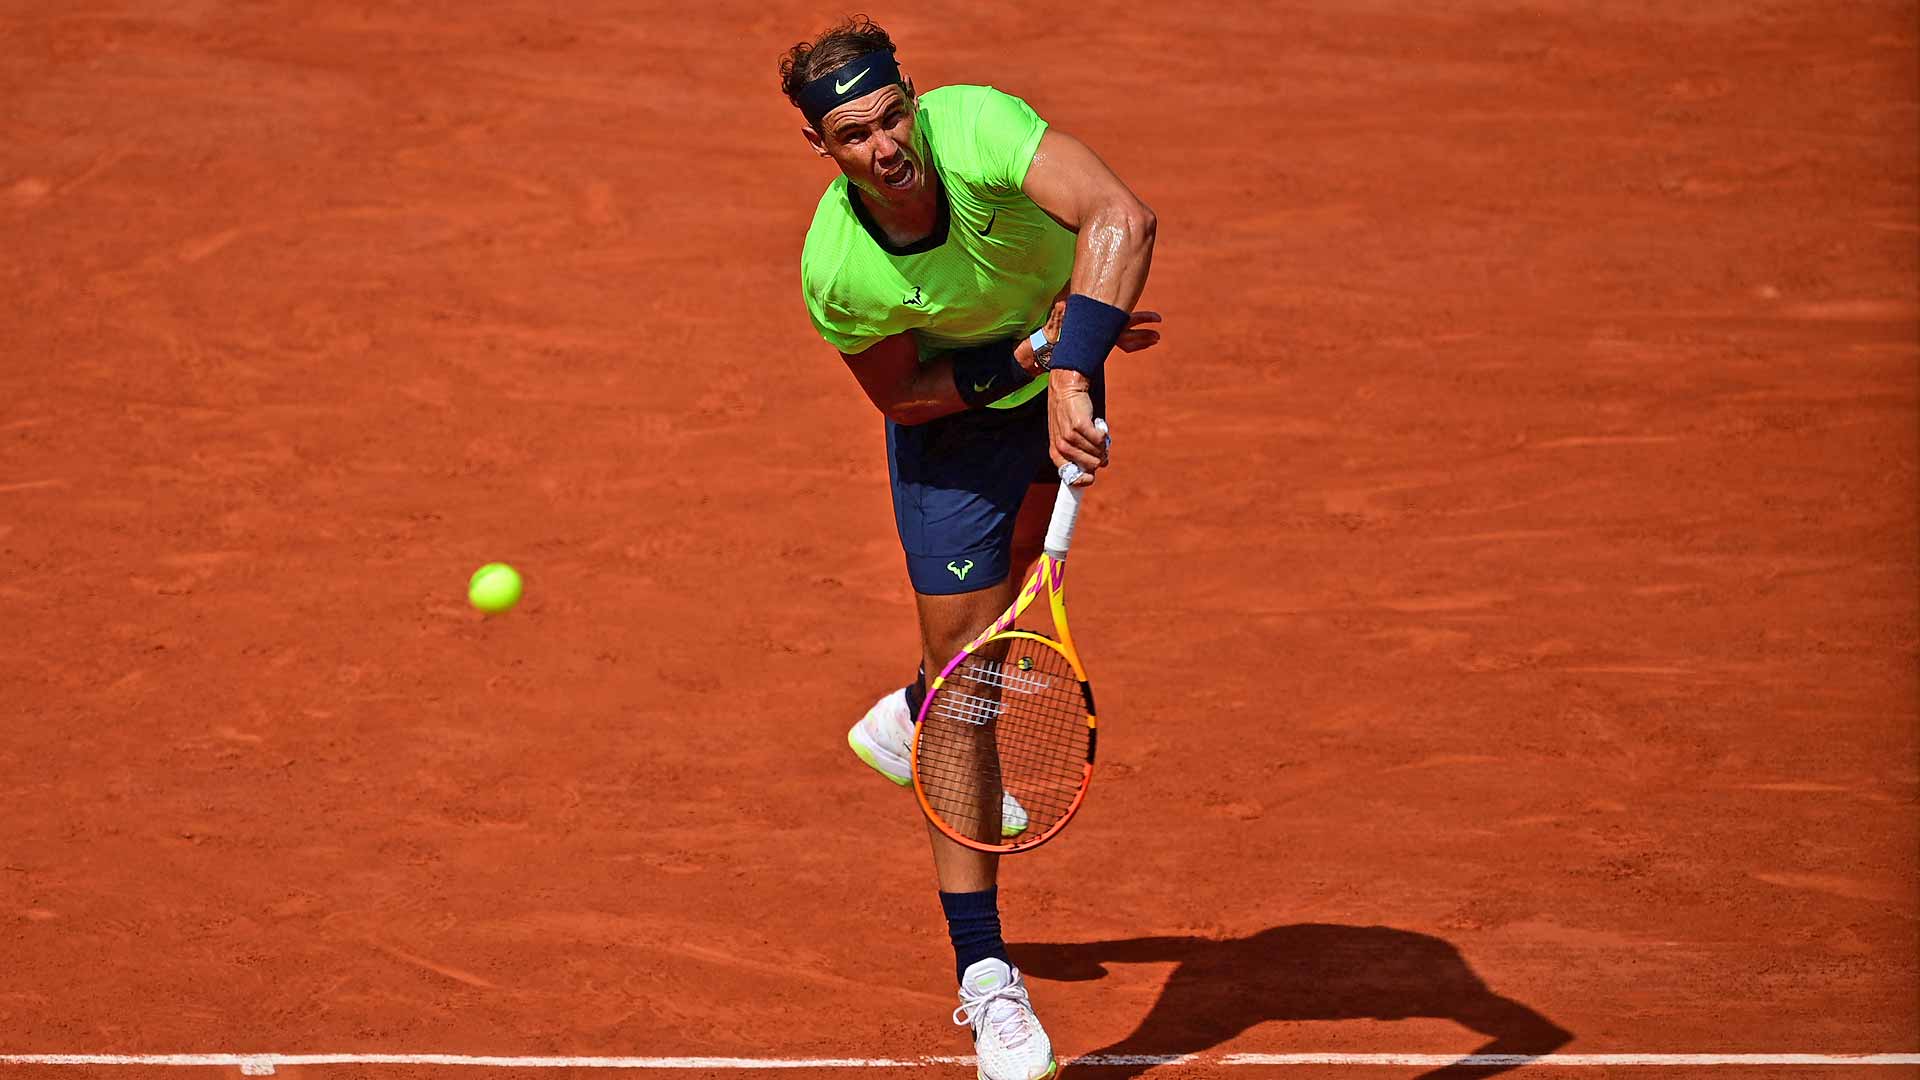 Rafael Nadal has saved 50 per cent of his break points at this Roland Garros leading into his semi-final against Novak Djokovic.